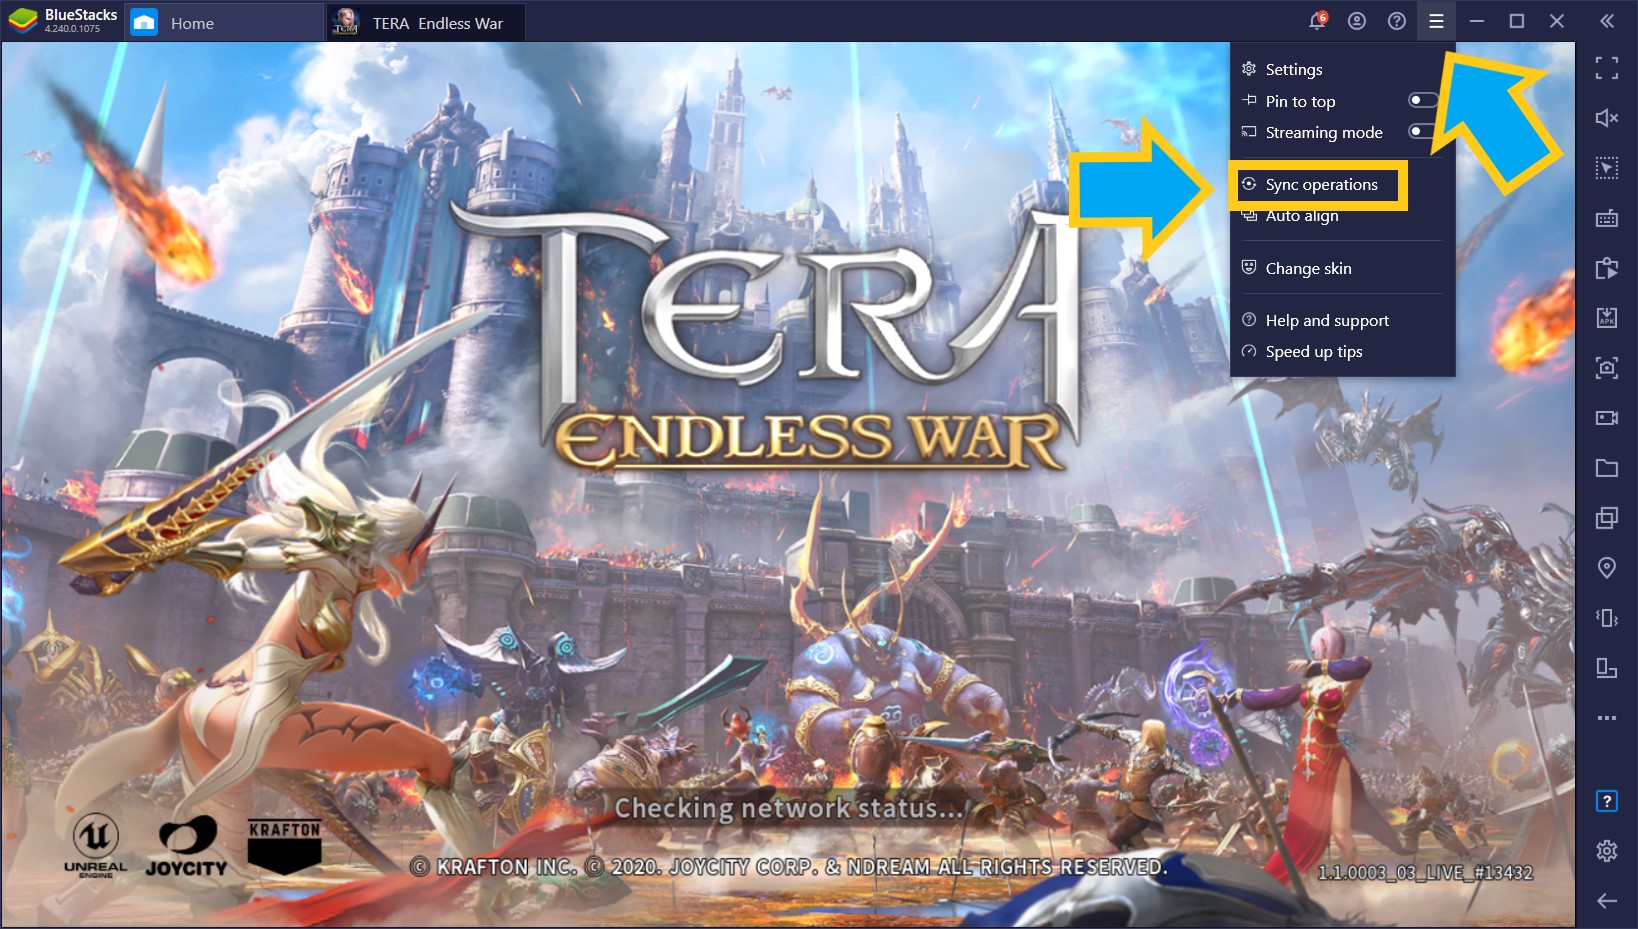 TERA: Endless War on PC - Tips and Tricks for Using BlueStacks to Automate and Improve Your Performance